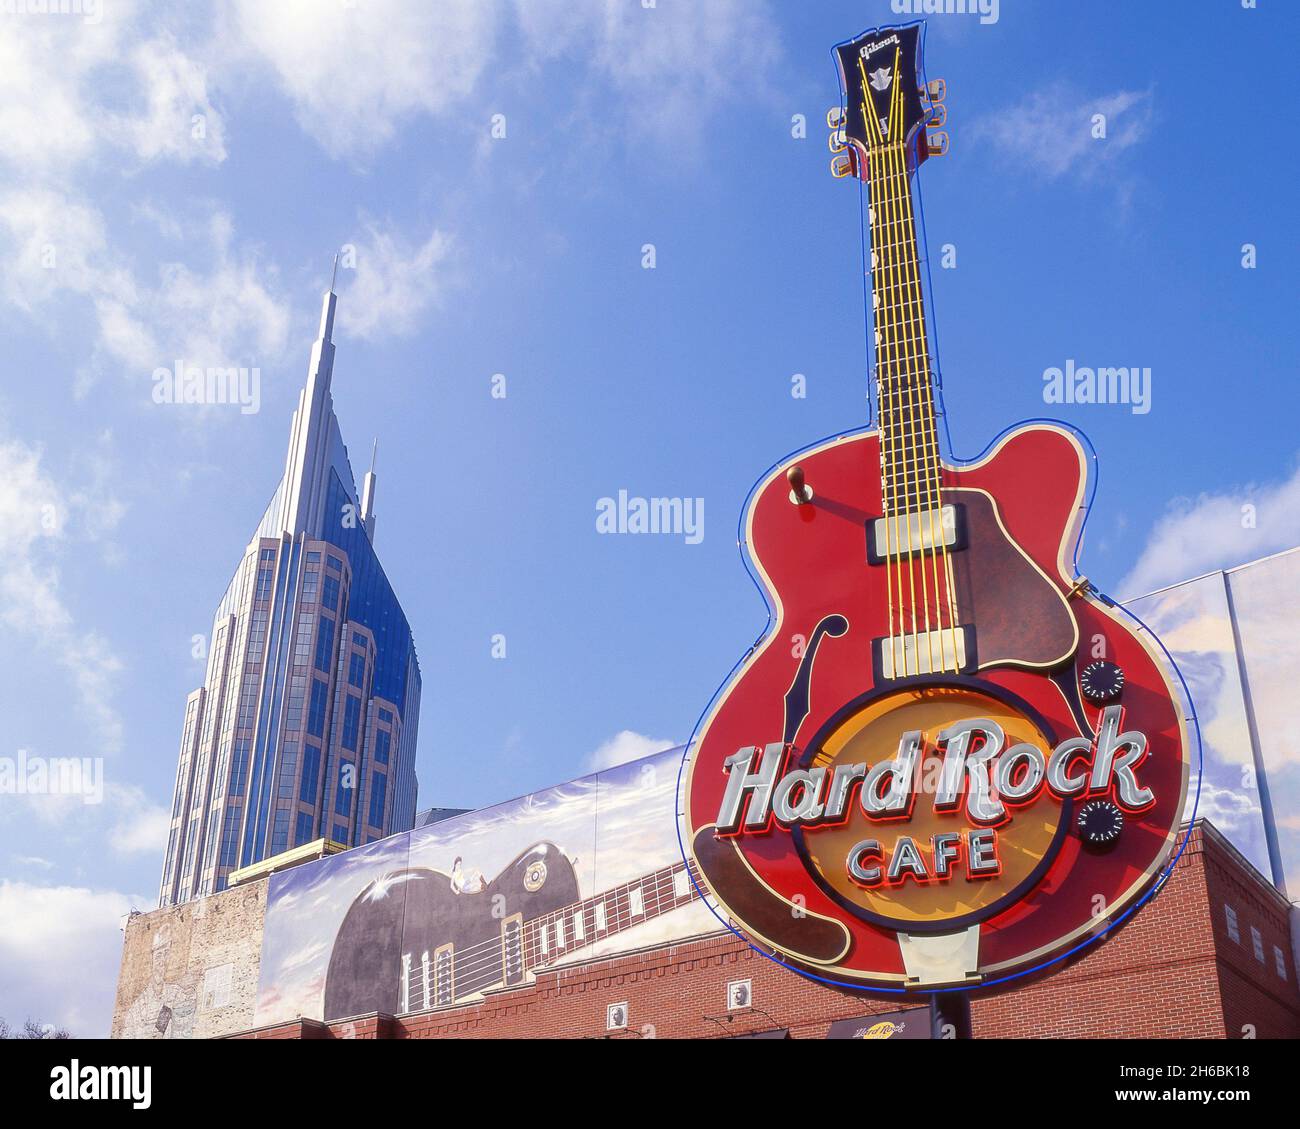 Hard Rock Cafe guitar sign, Broadway, Nashville, Tennessee, United States of America Stock Photo